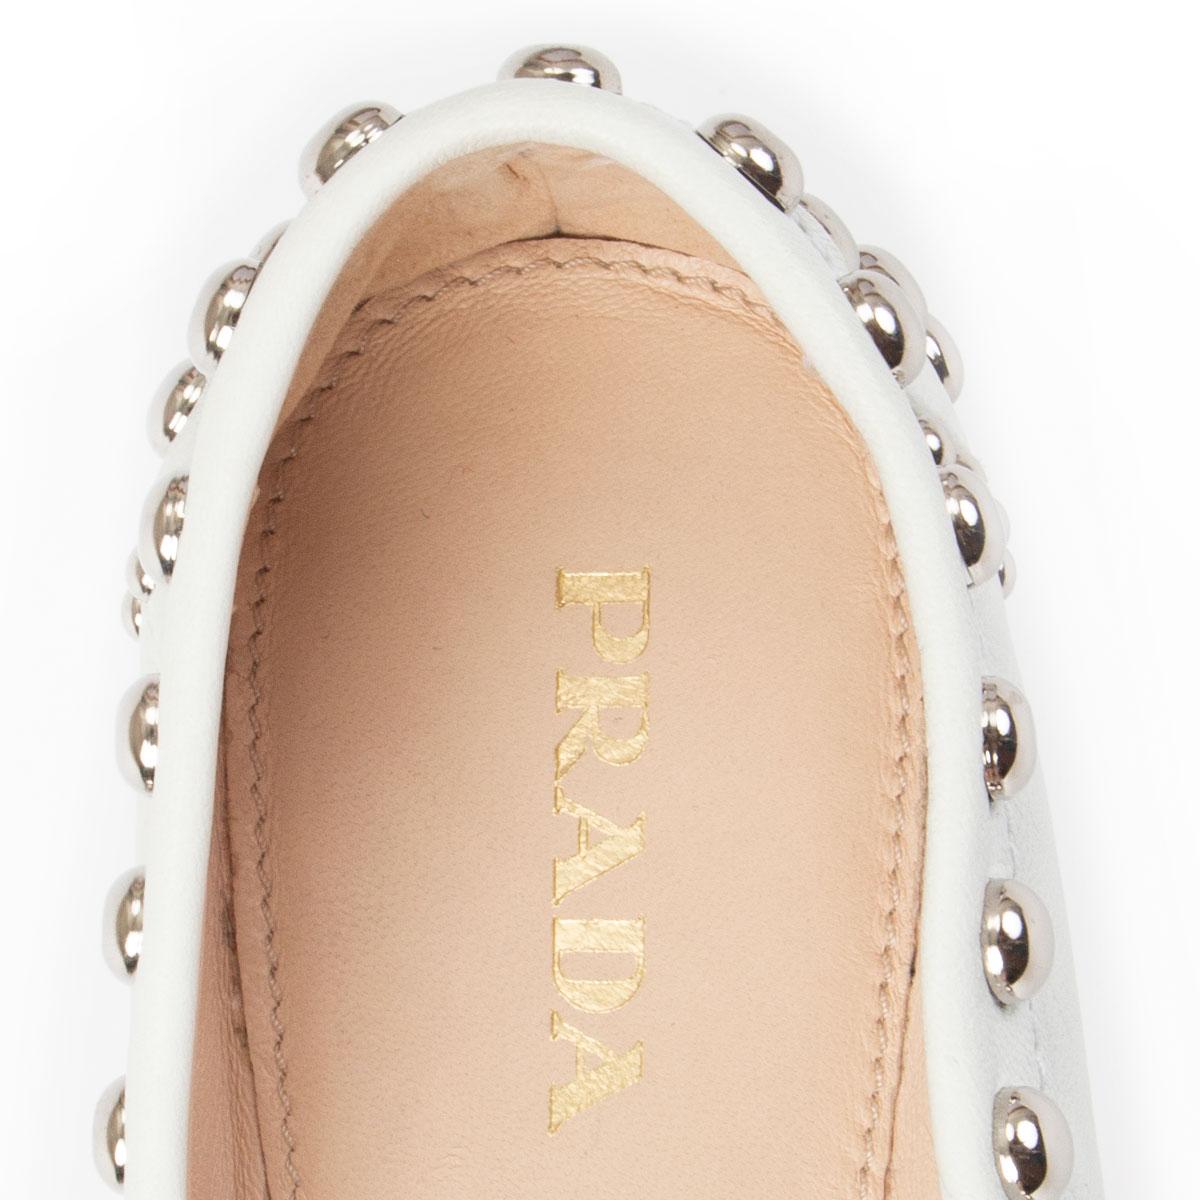 White PRADA white leather STUDDED Moccasins Loafers Flats Shoes 39.5